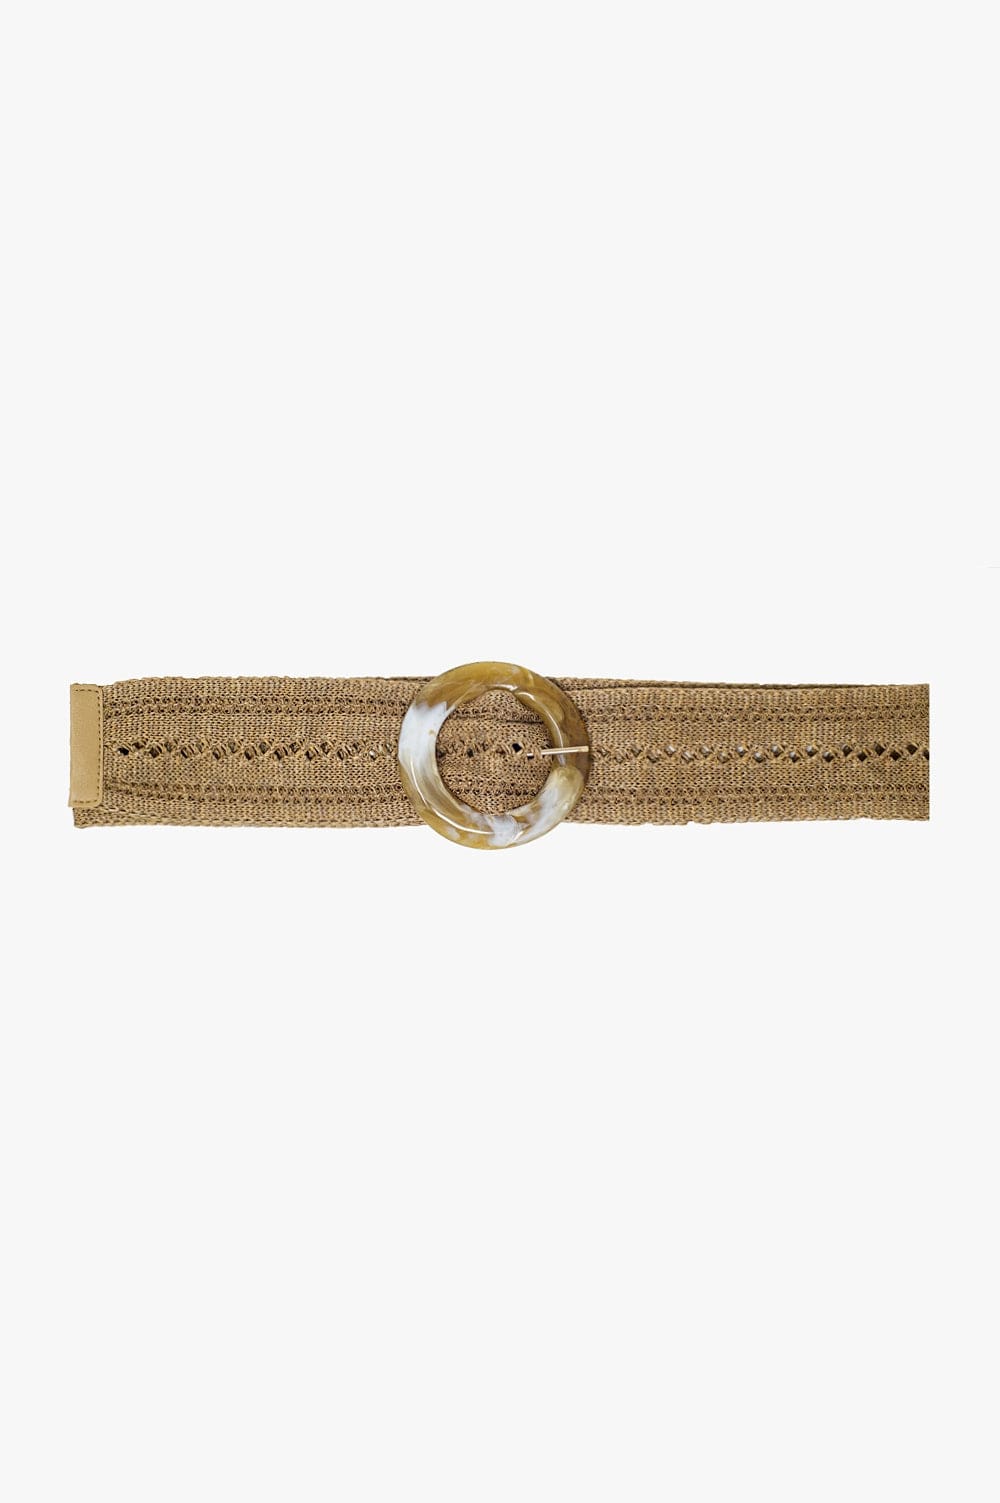 Q2 Women's Belt One Size / Brown Beige Woven Belt With Round Buckle With Marble Effect